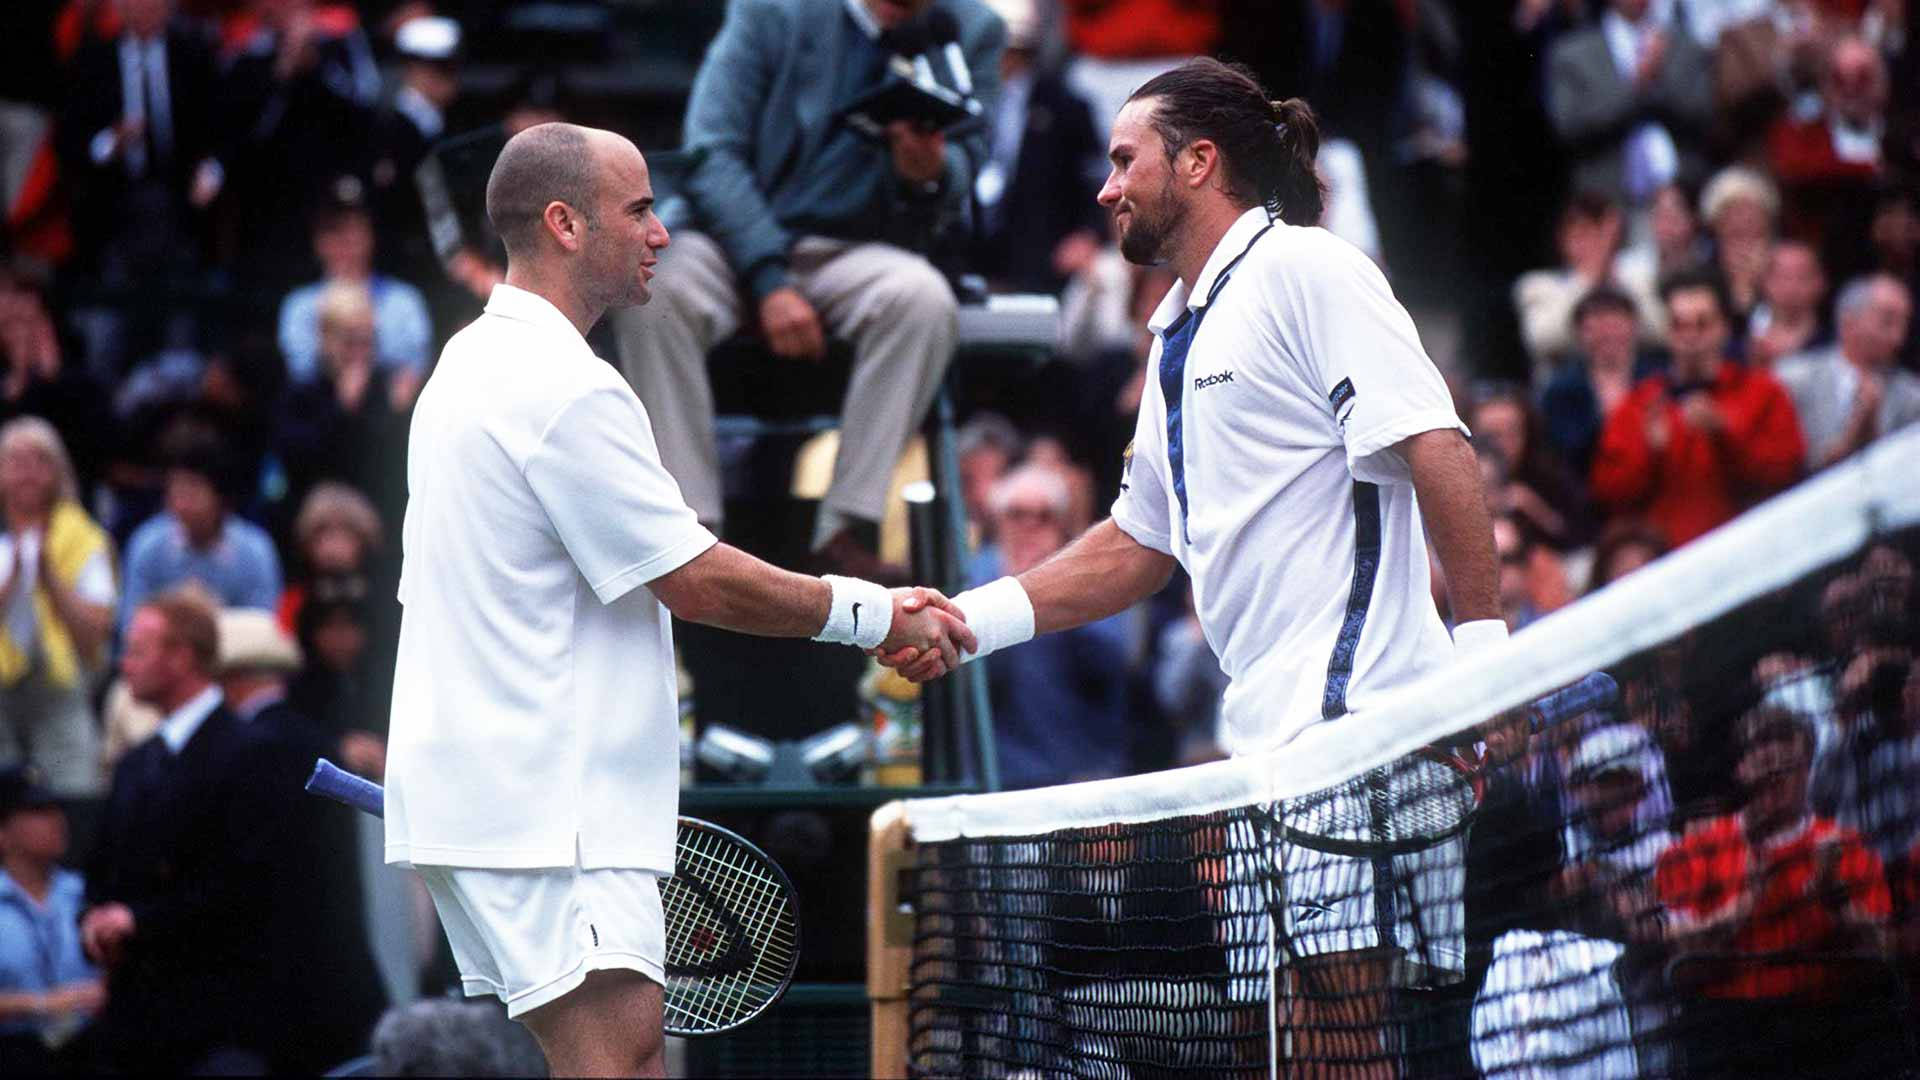 Patrick Rafter And Andre Agassi Wallpaper